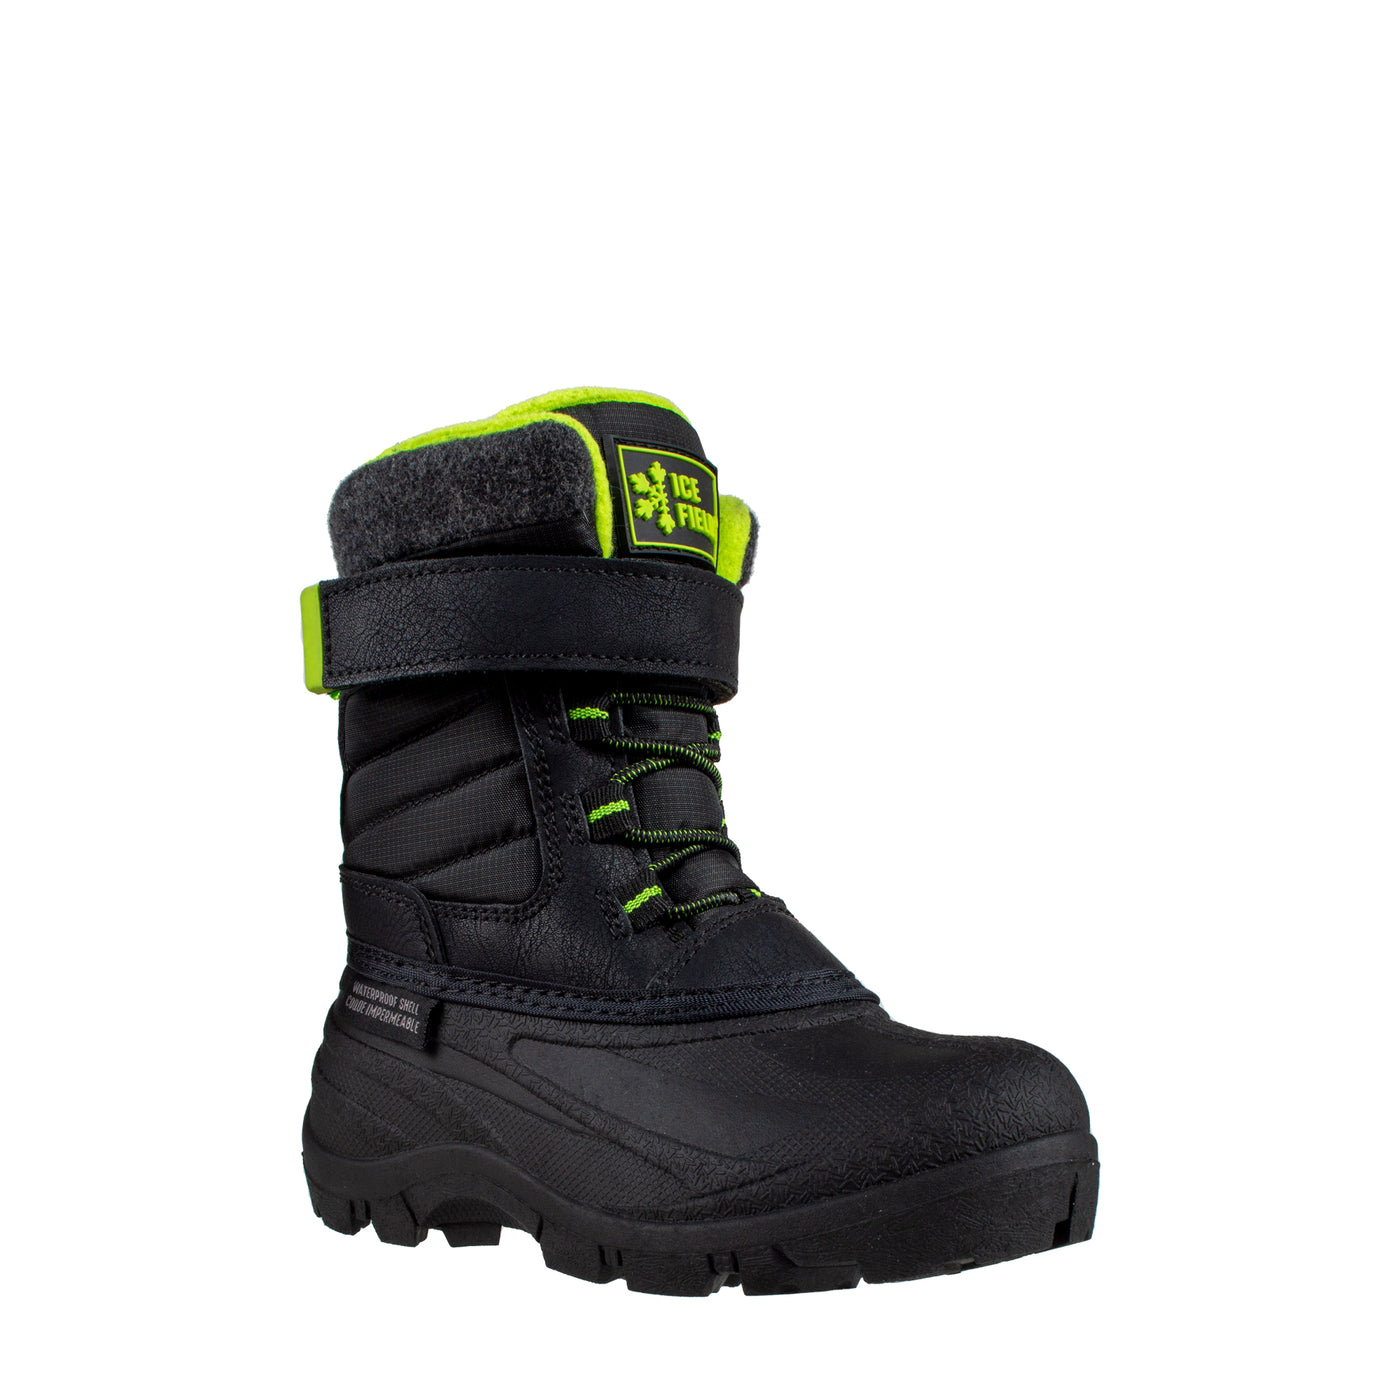 Youth's Black Lime Shell Boot